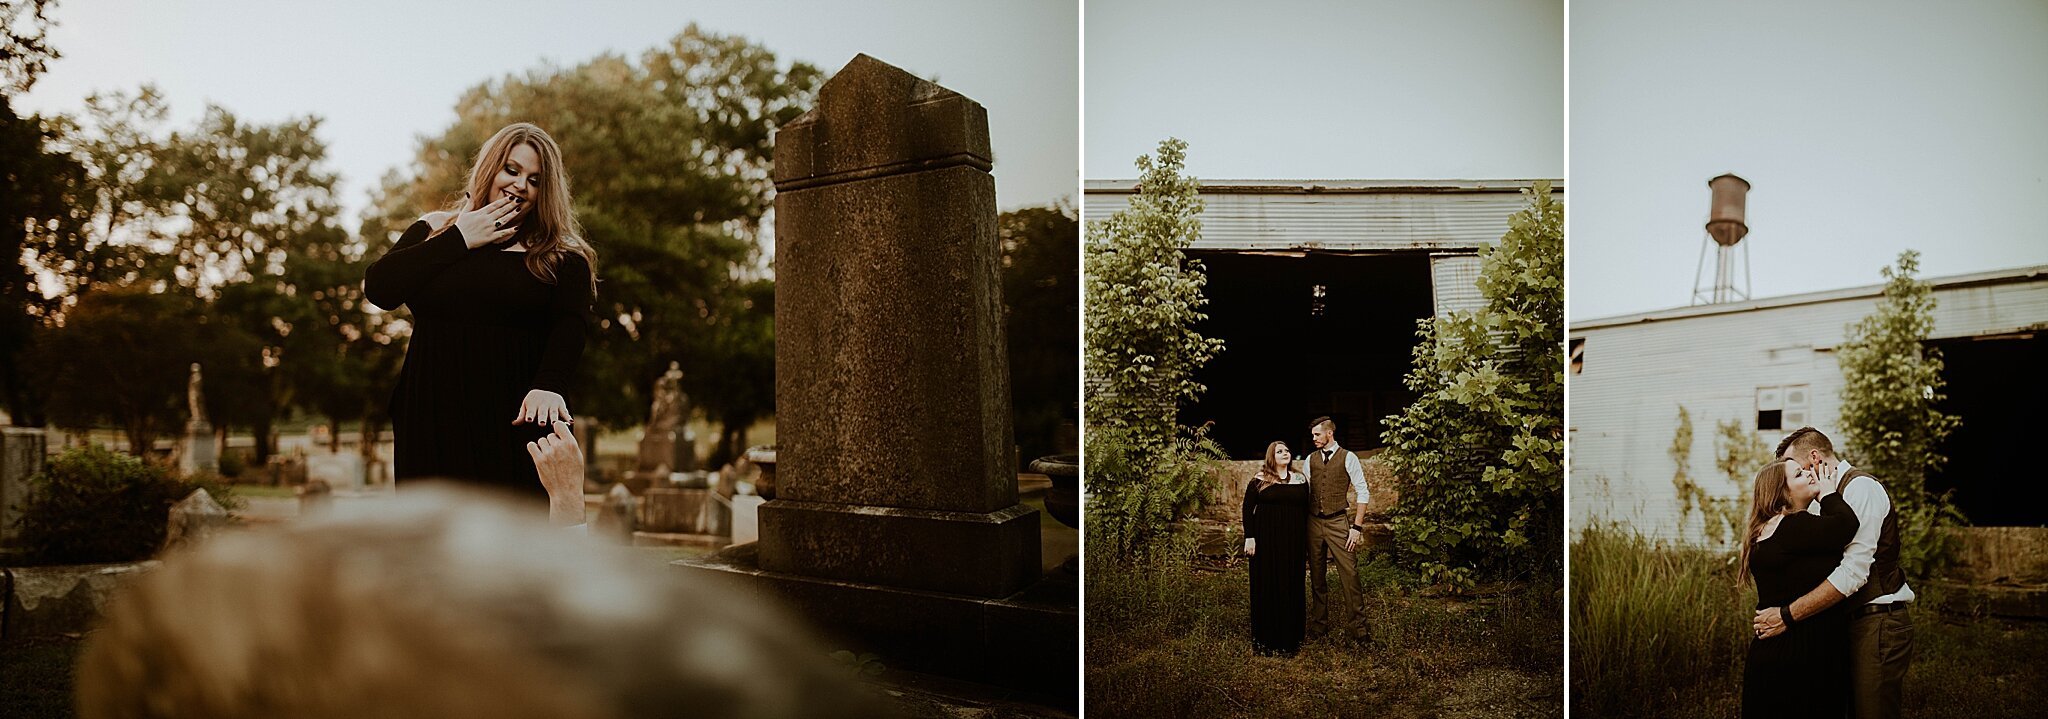 graveyard engagement session by abandoned building